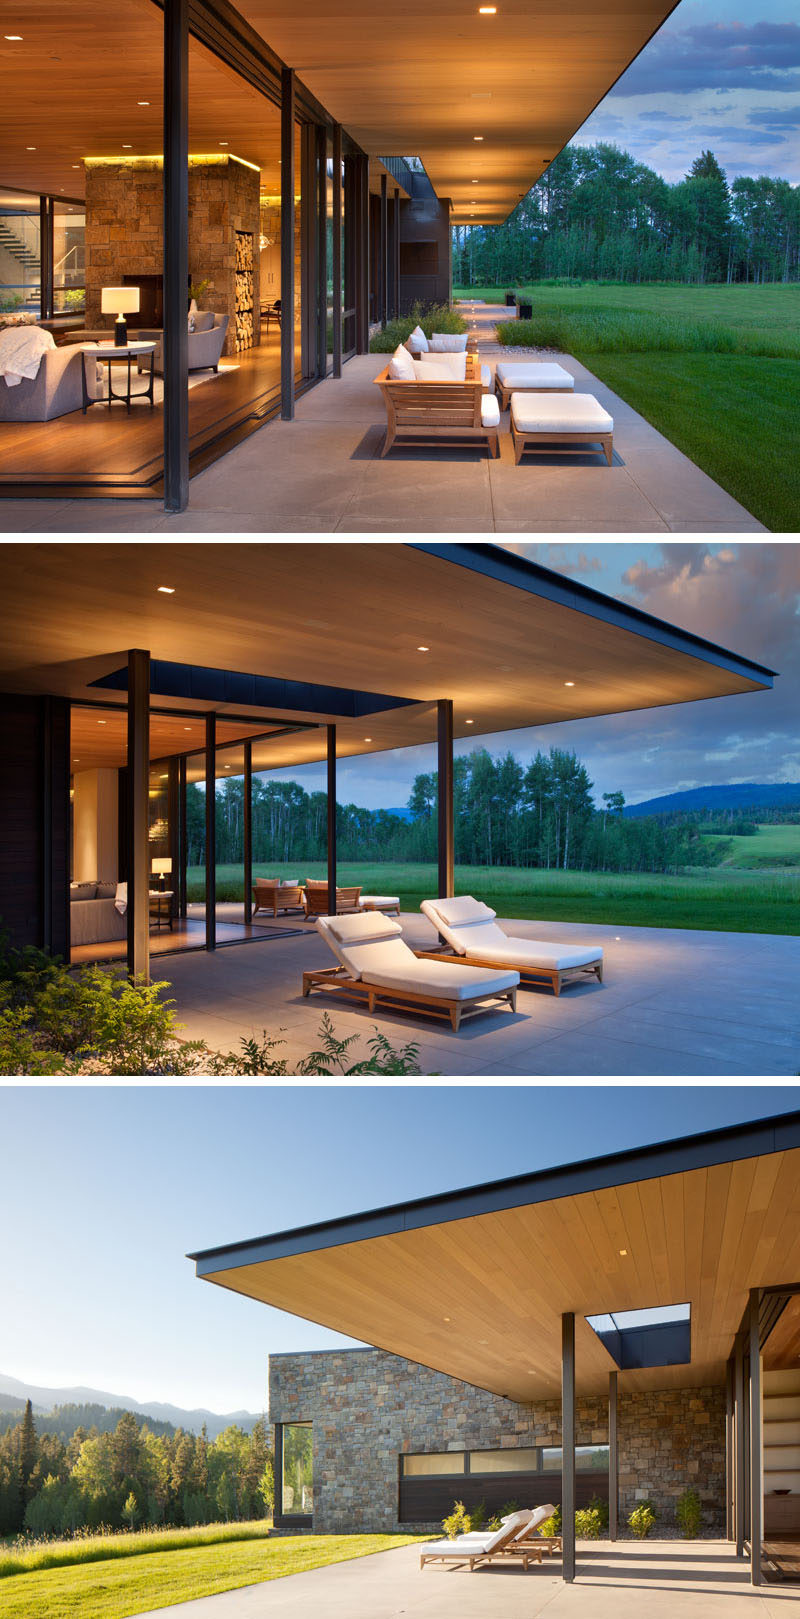 This modern house has sliding glass walls that open the living room to the outdoors, and the wood ceiling featured inside, continues through to the exterior of the house. #ModernHouse #WoodCeiling